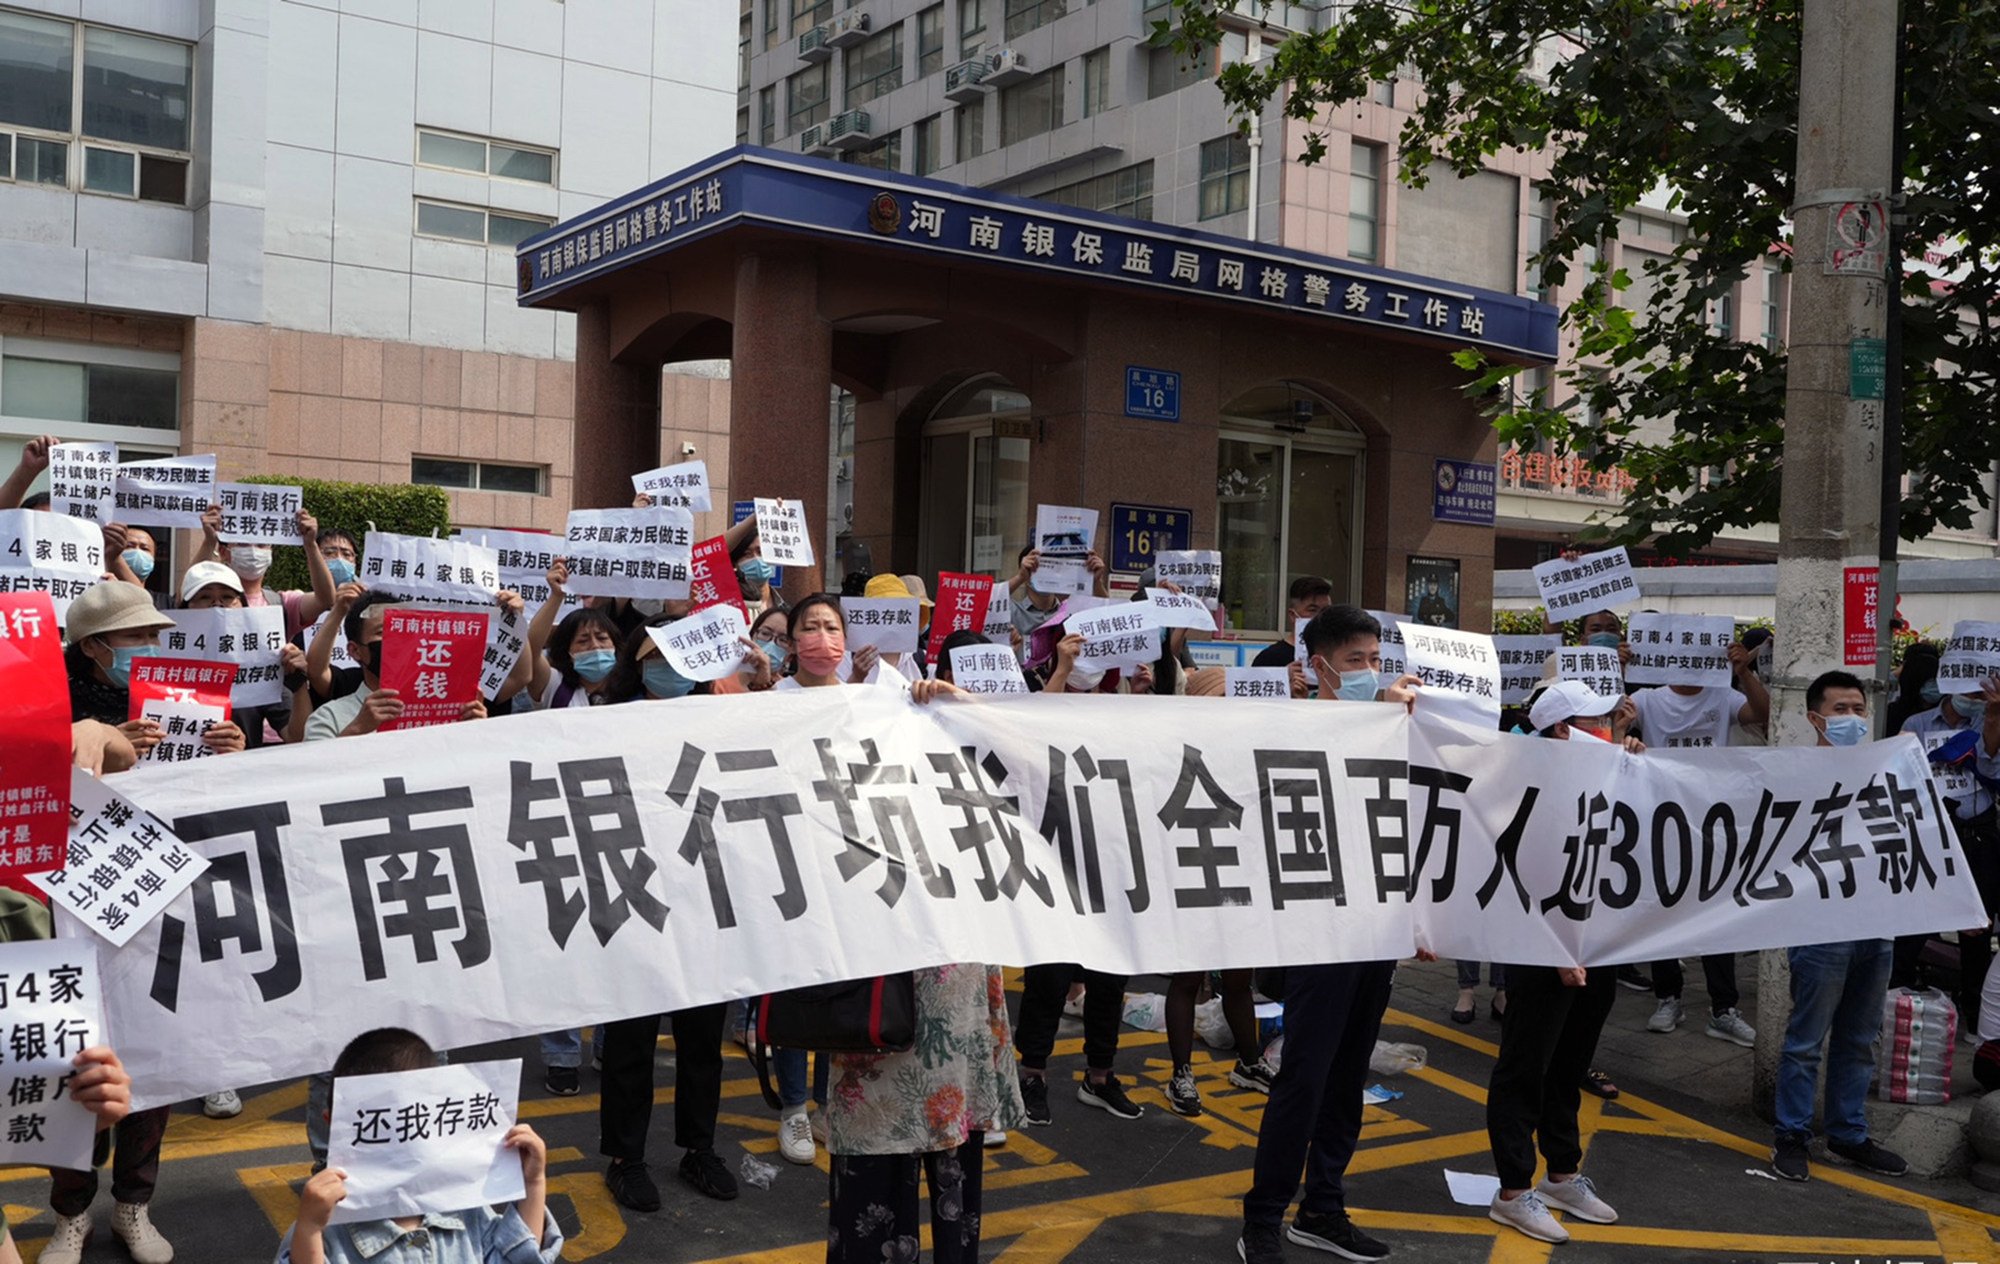 Protesters unfurled banners at the China Banking and Insurance Regulatory Commission (CBIRC) office in the Henan provincial capital of Zhengzhou on May 30, 2022, demanding the return of their money after assets were frozen. Photo: Weibo.